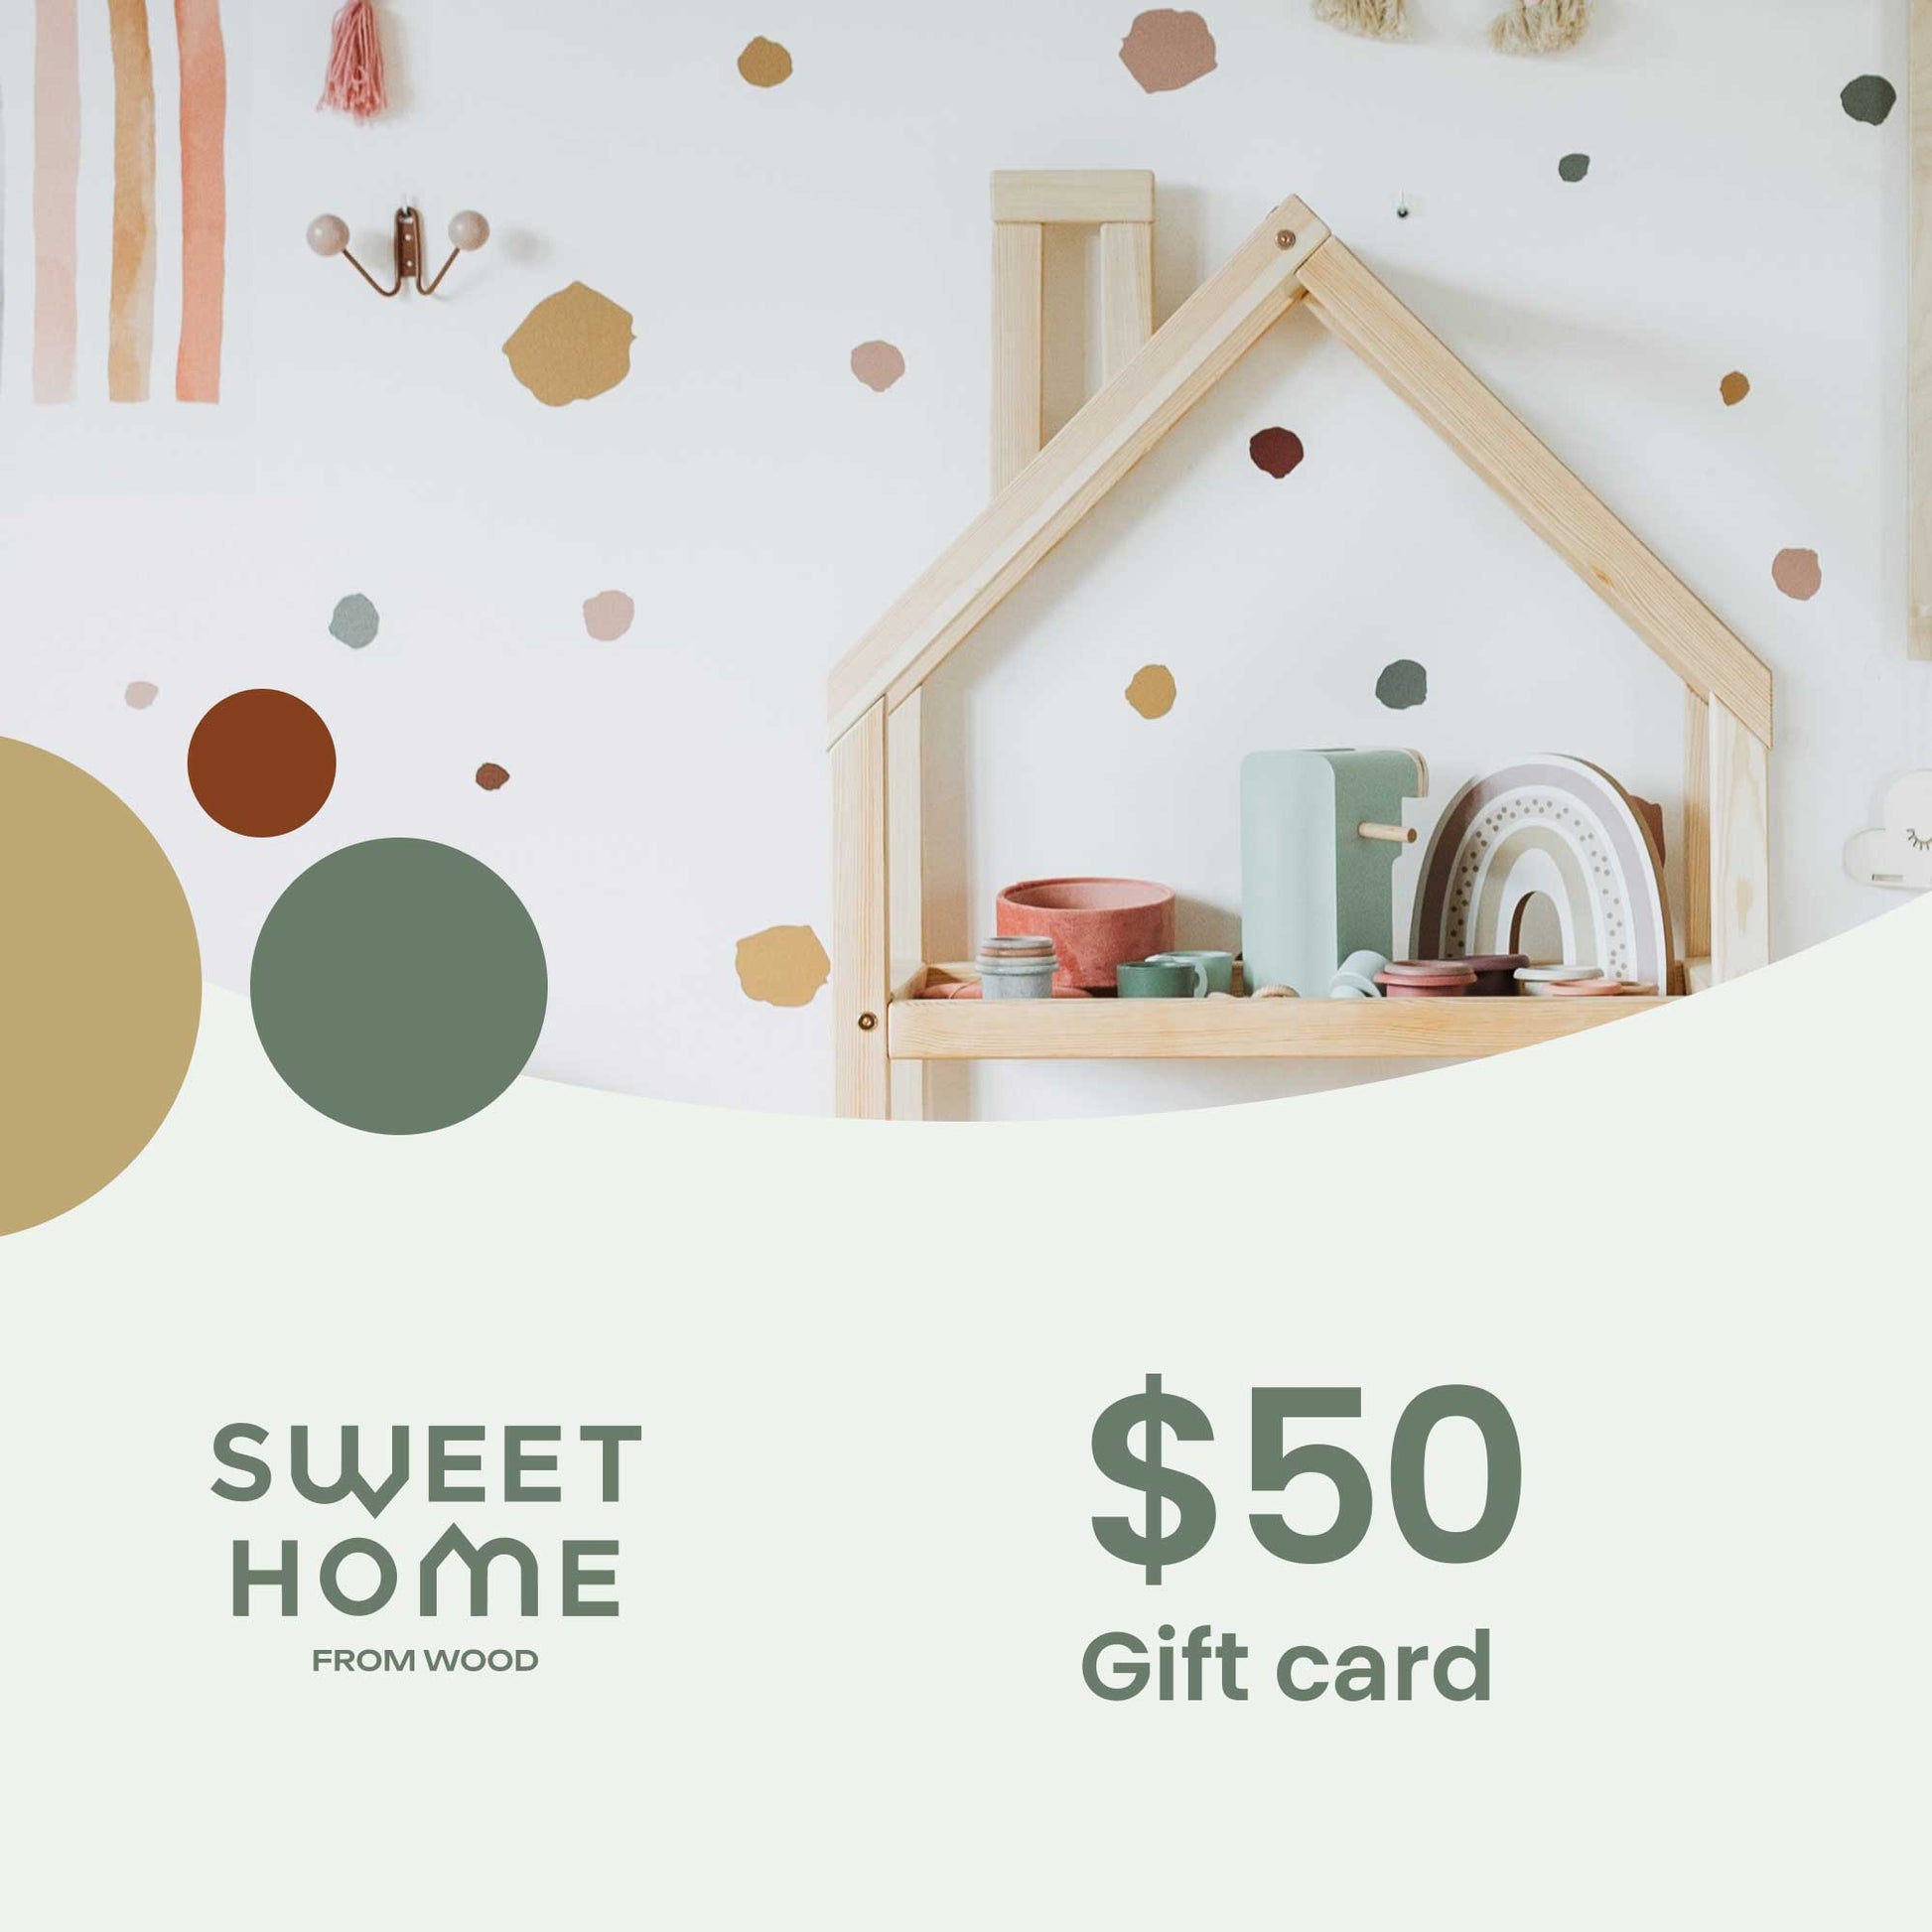 Gift card featuring a $50 USD value, ready for purchase or gifting.